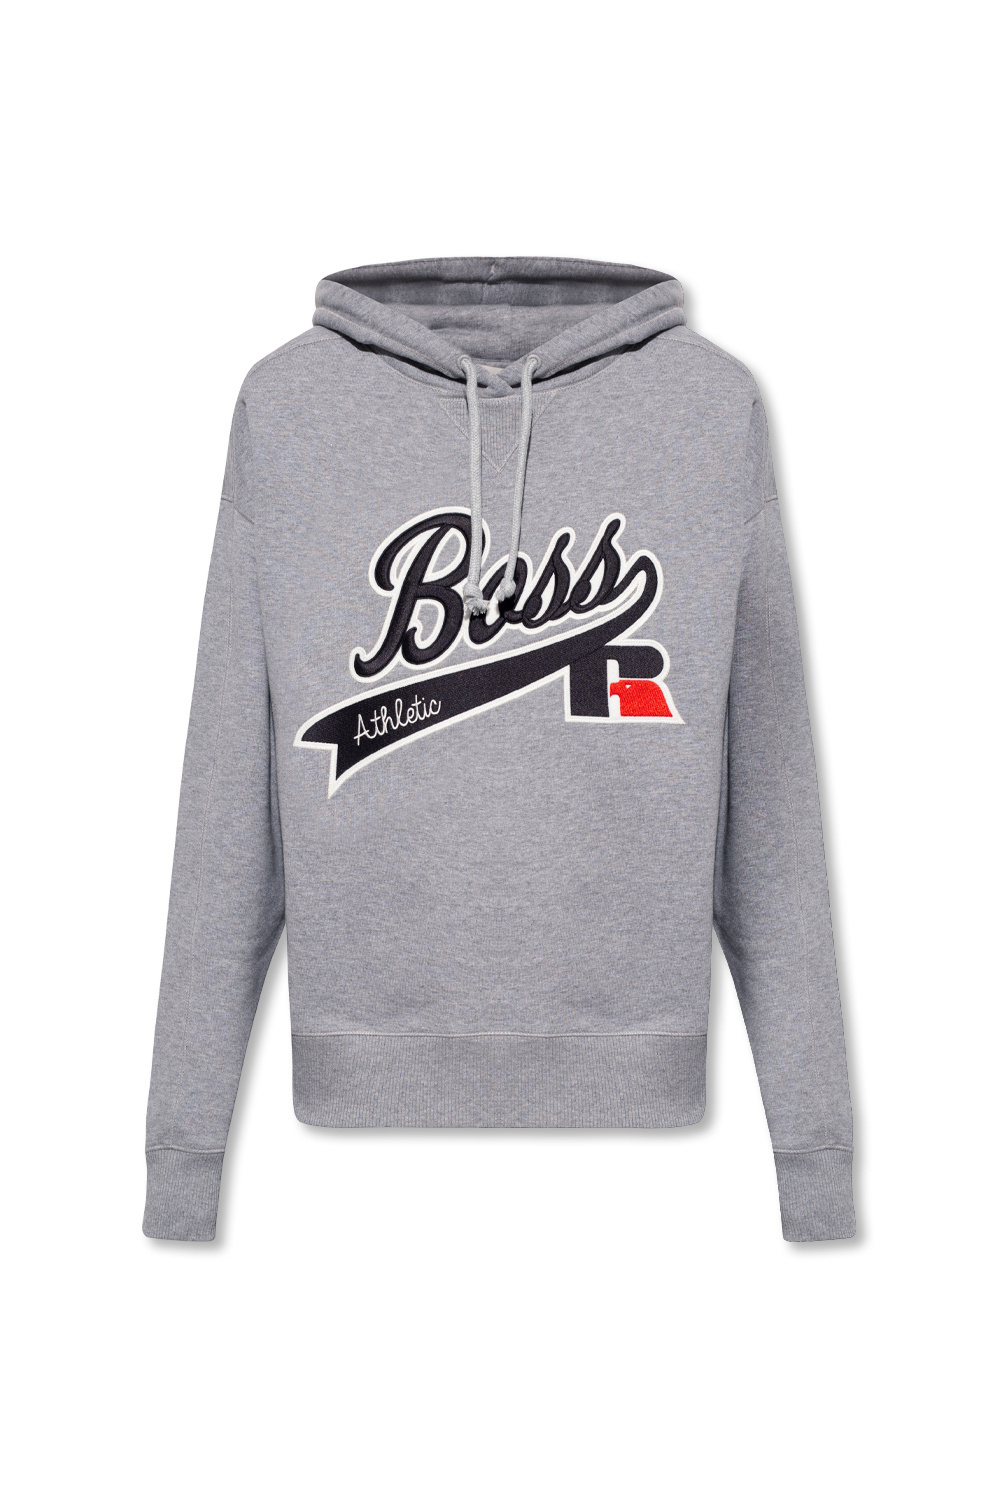 IetpShops GB - Grey Hoodie with logo patch BOSS x Russell Athletic